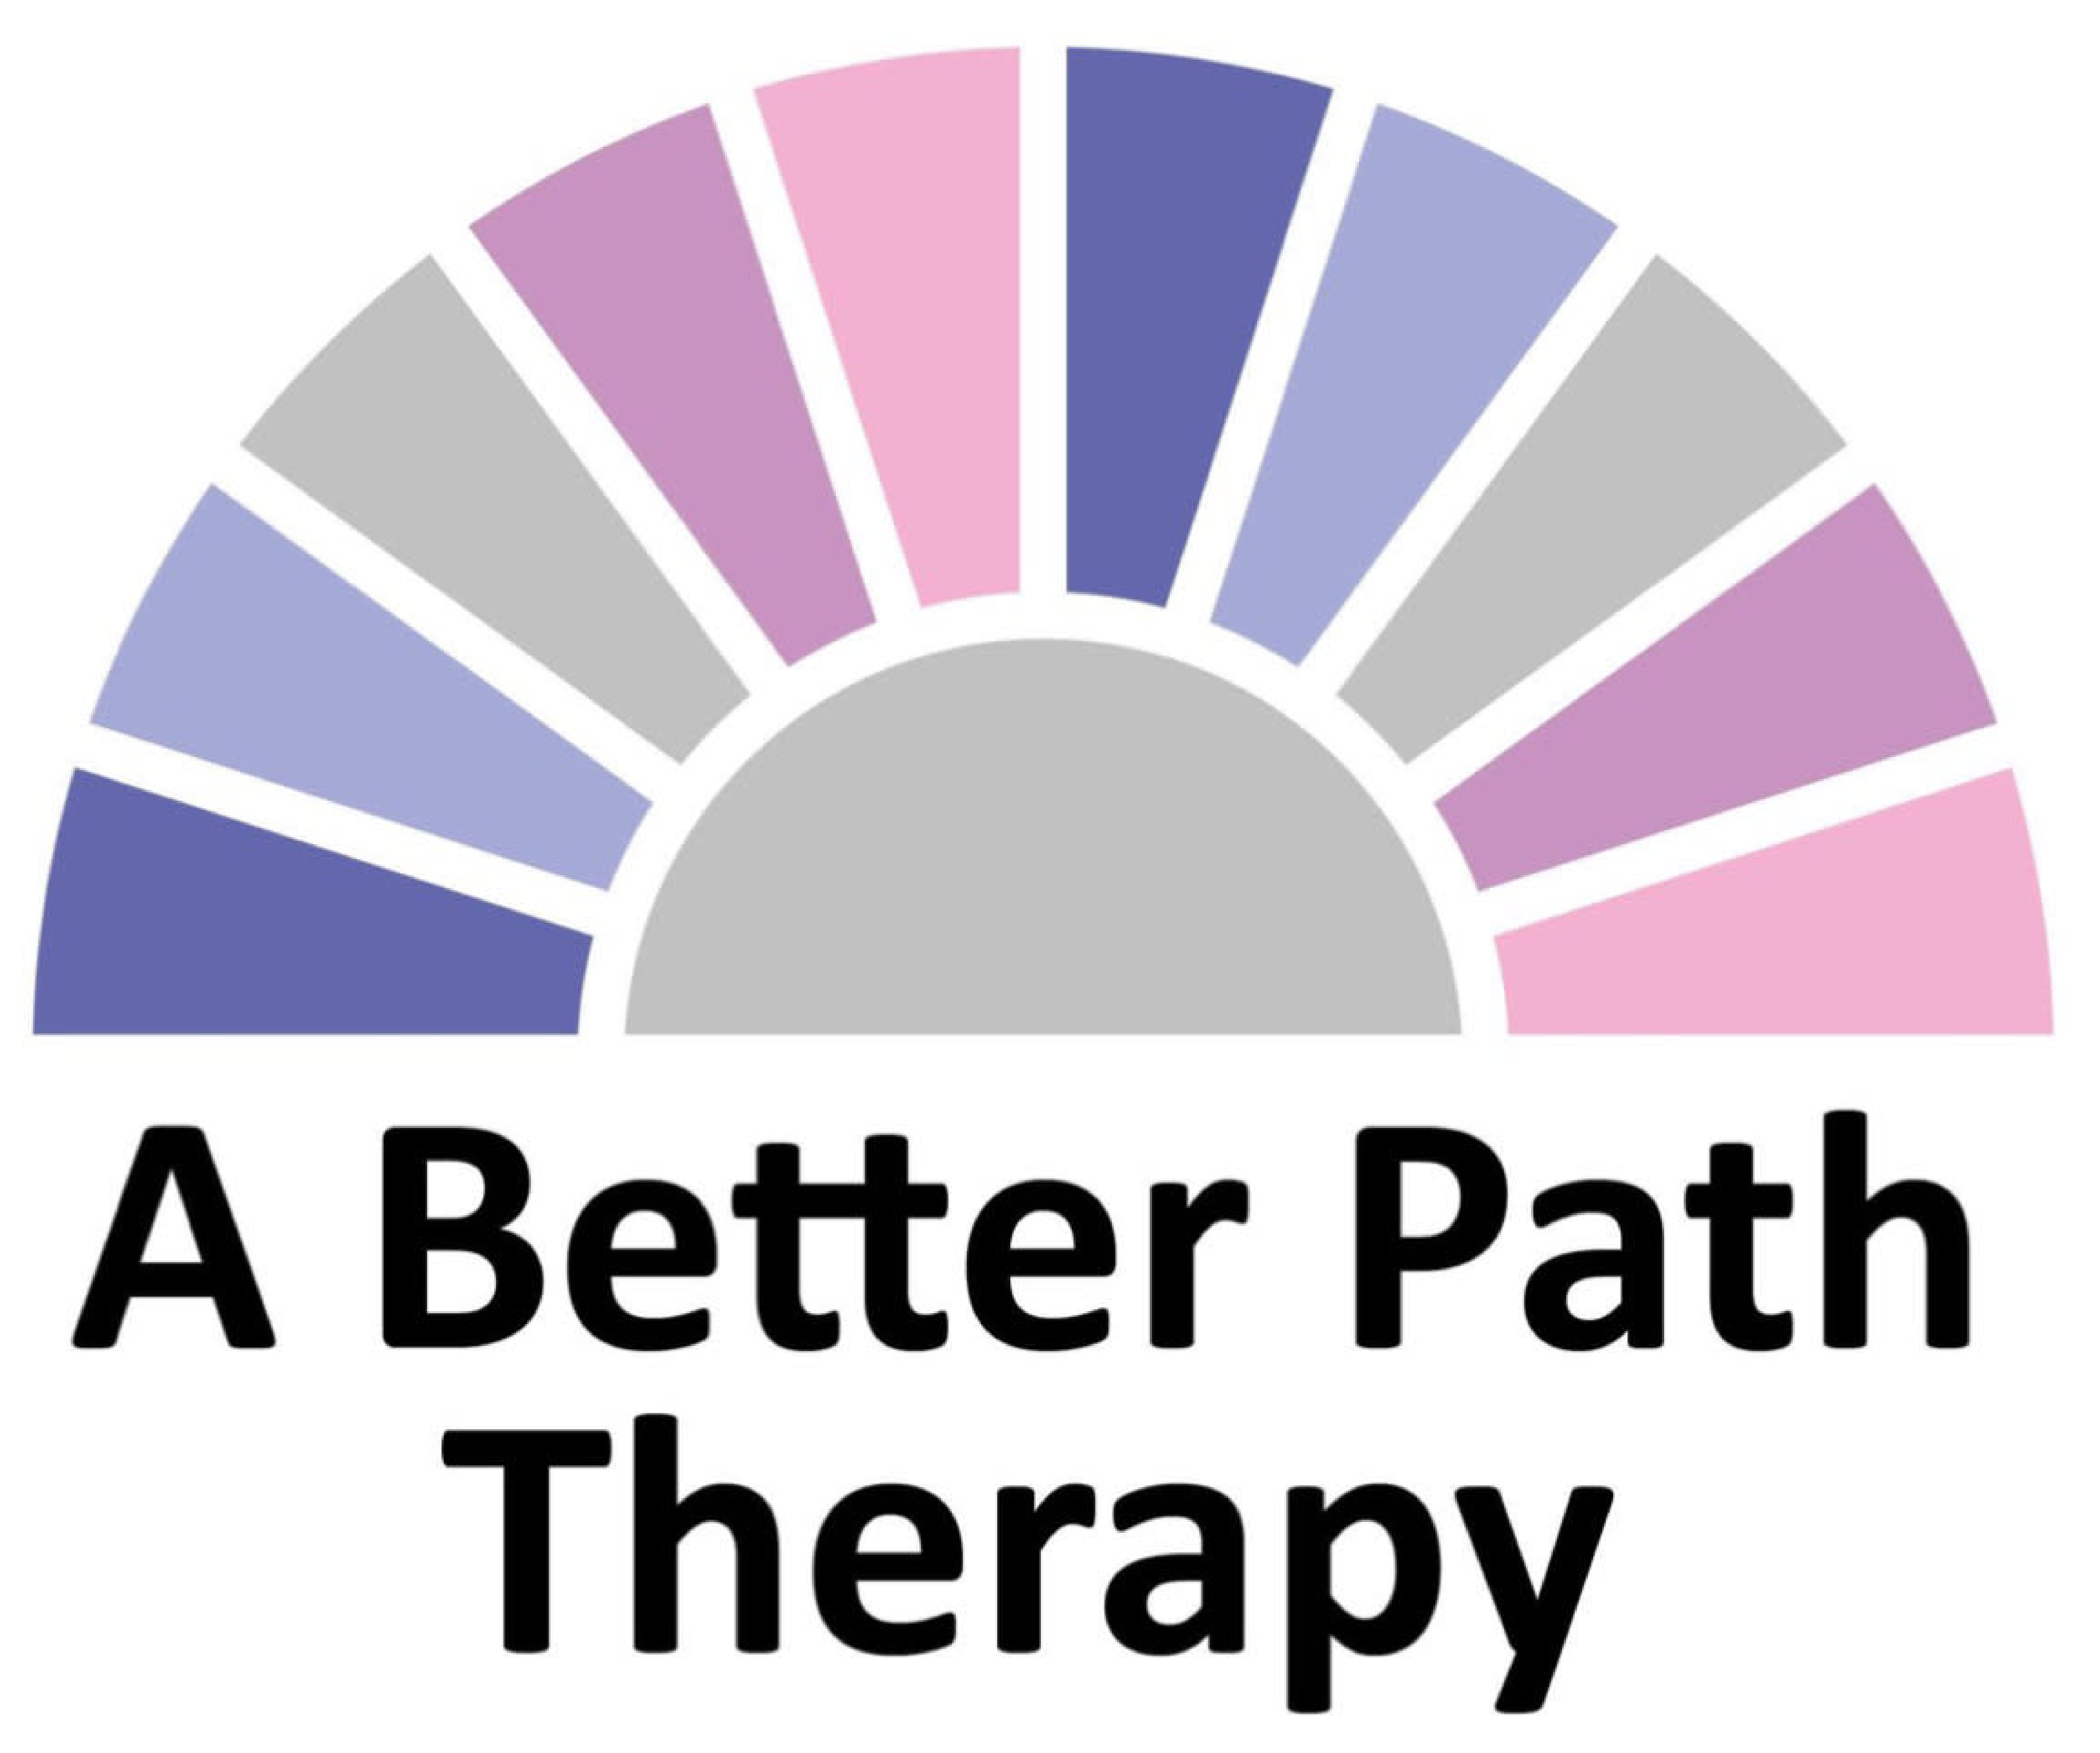 A Better Path Therapy logo cropped